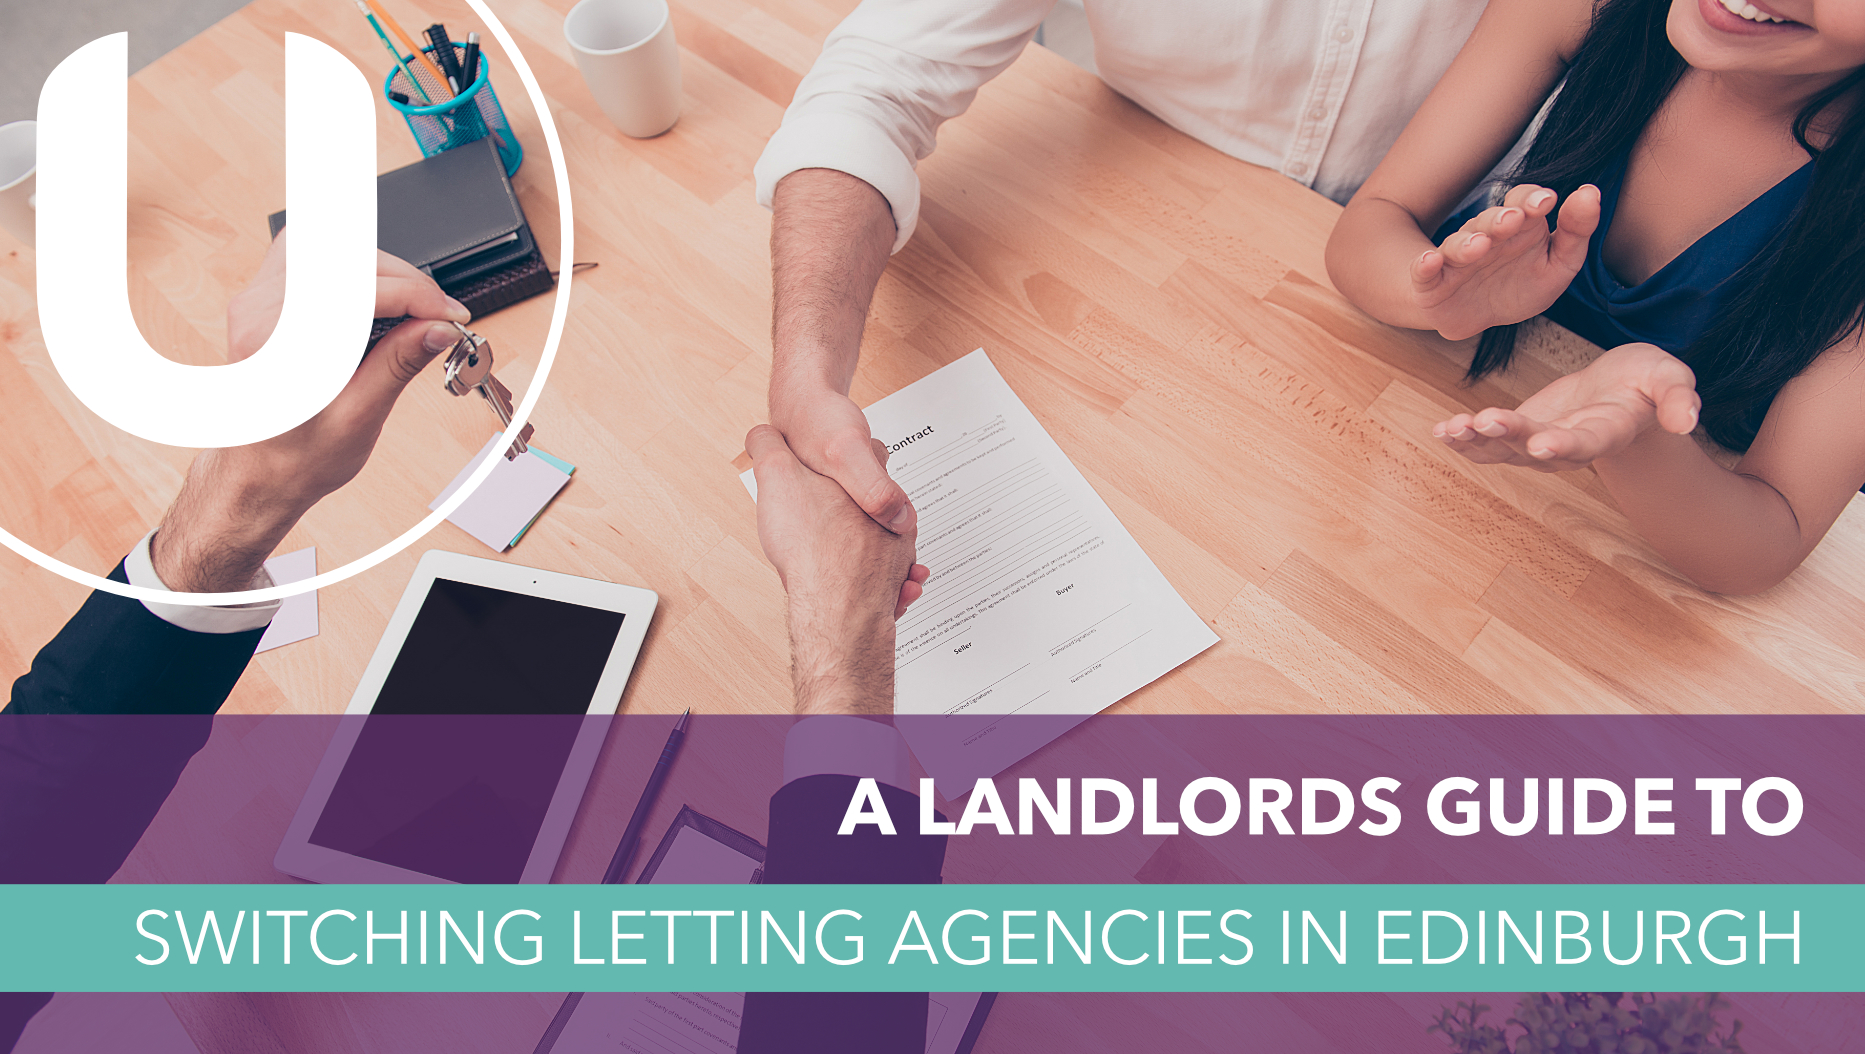 A Landlord’s Guide to Switching Letting Agencies in Edinburgh